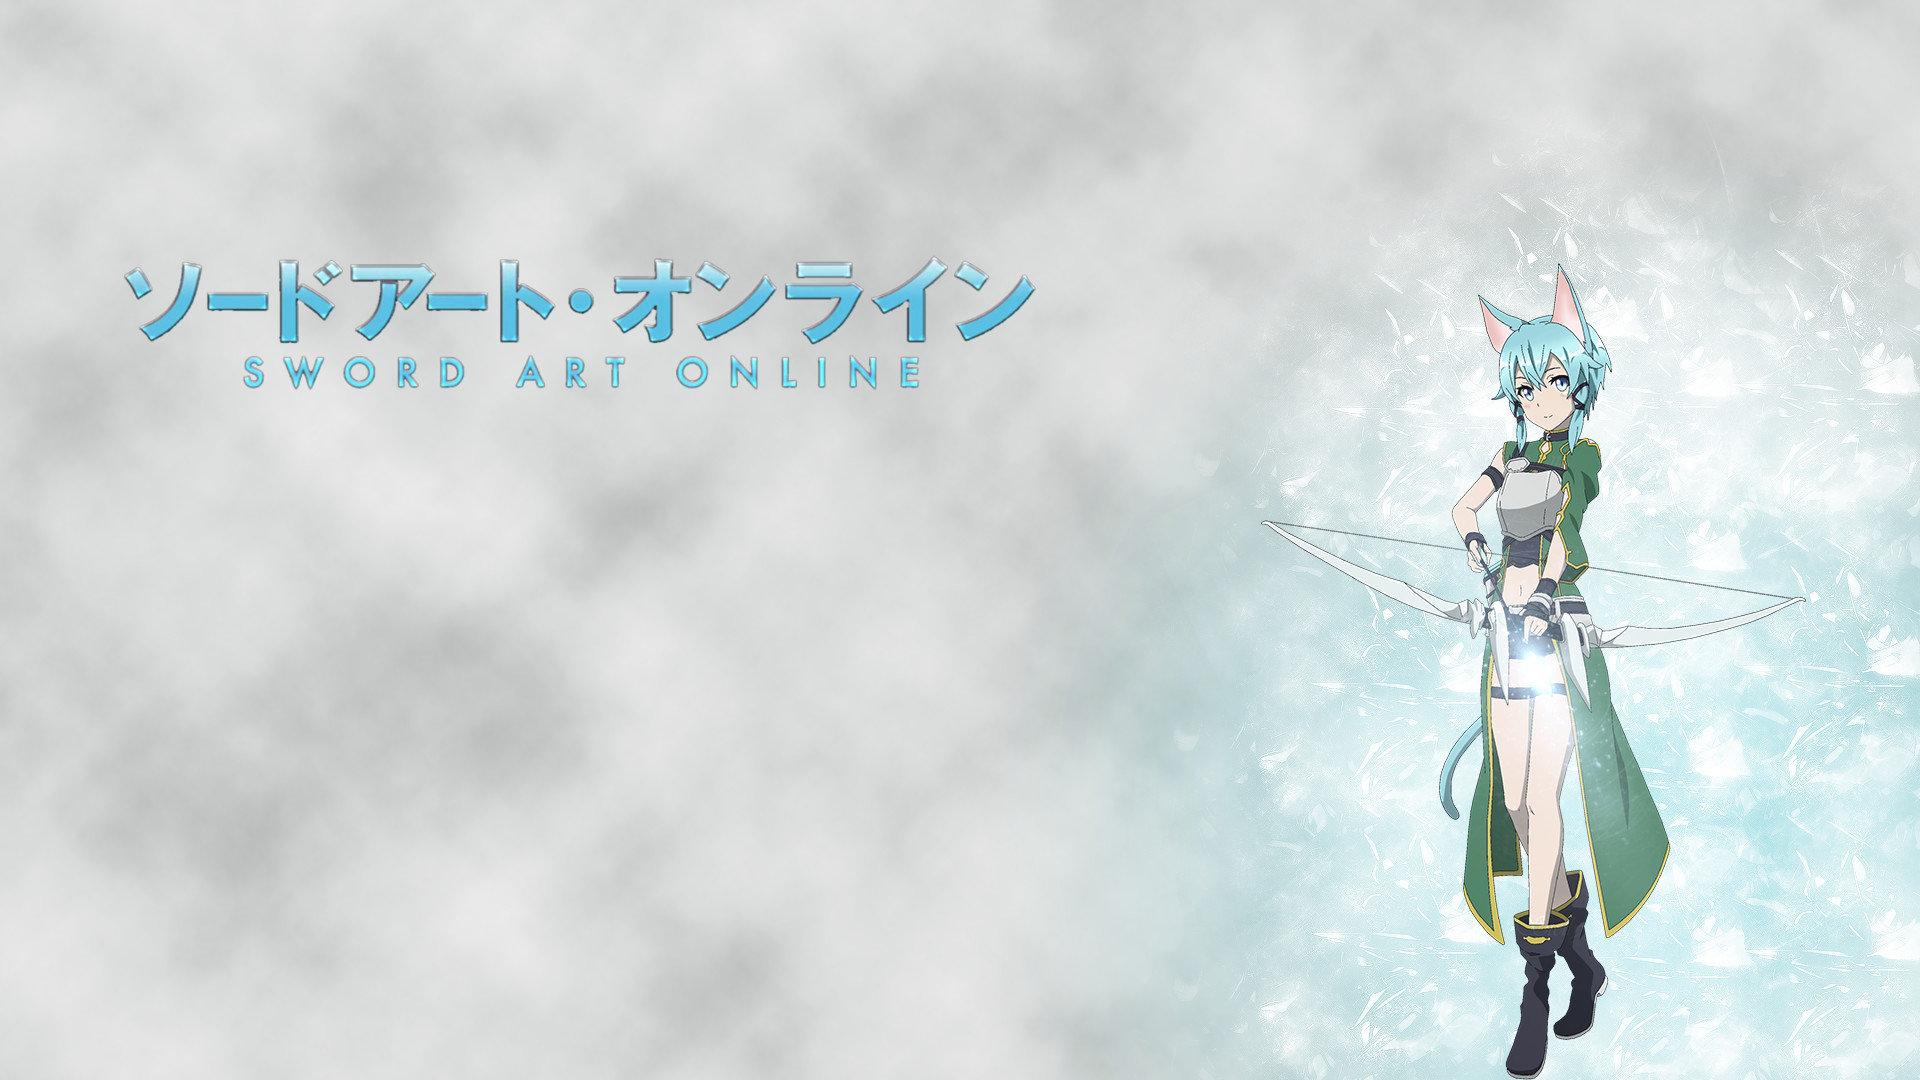 Wallpaper I made with Sinon from Sword Art Online 2